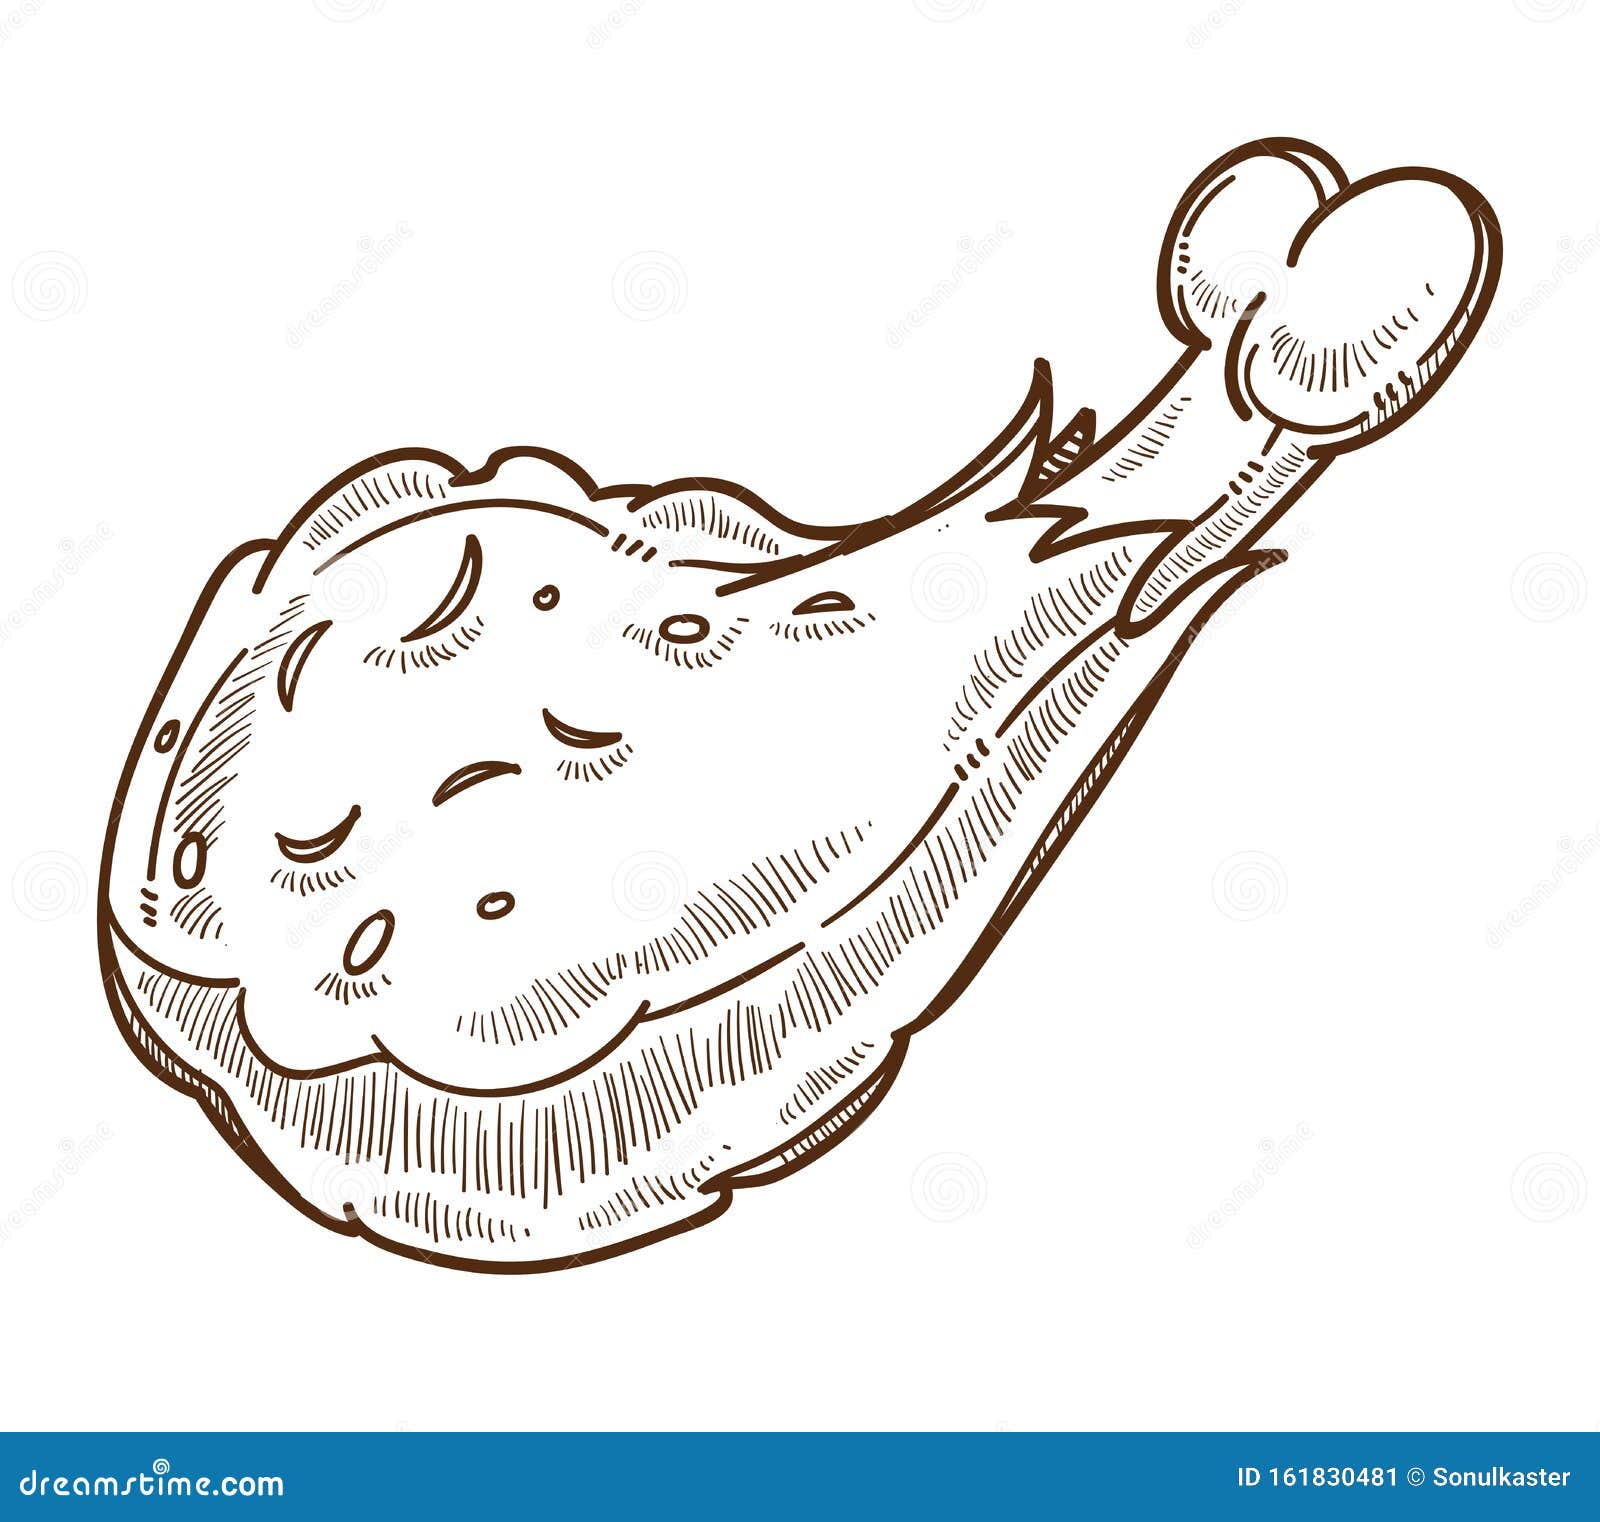 Fried chicken drumstick, hand drawn doodle outline, vector illustration  isolated on white background. | Stock vector | Colourbox